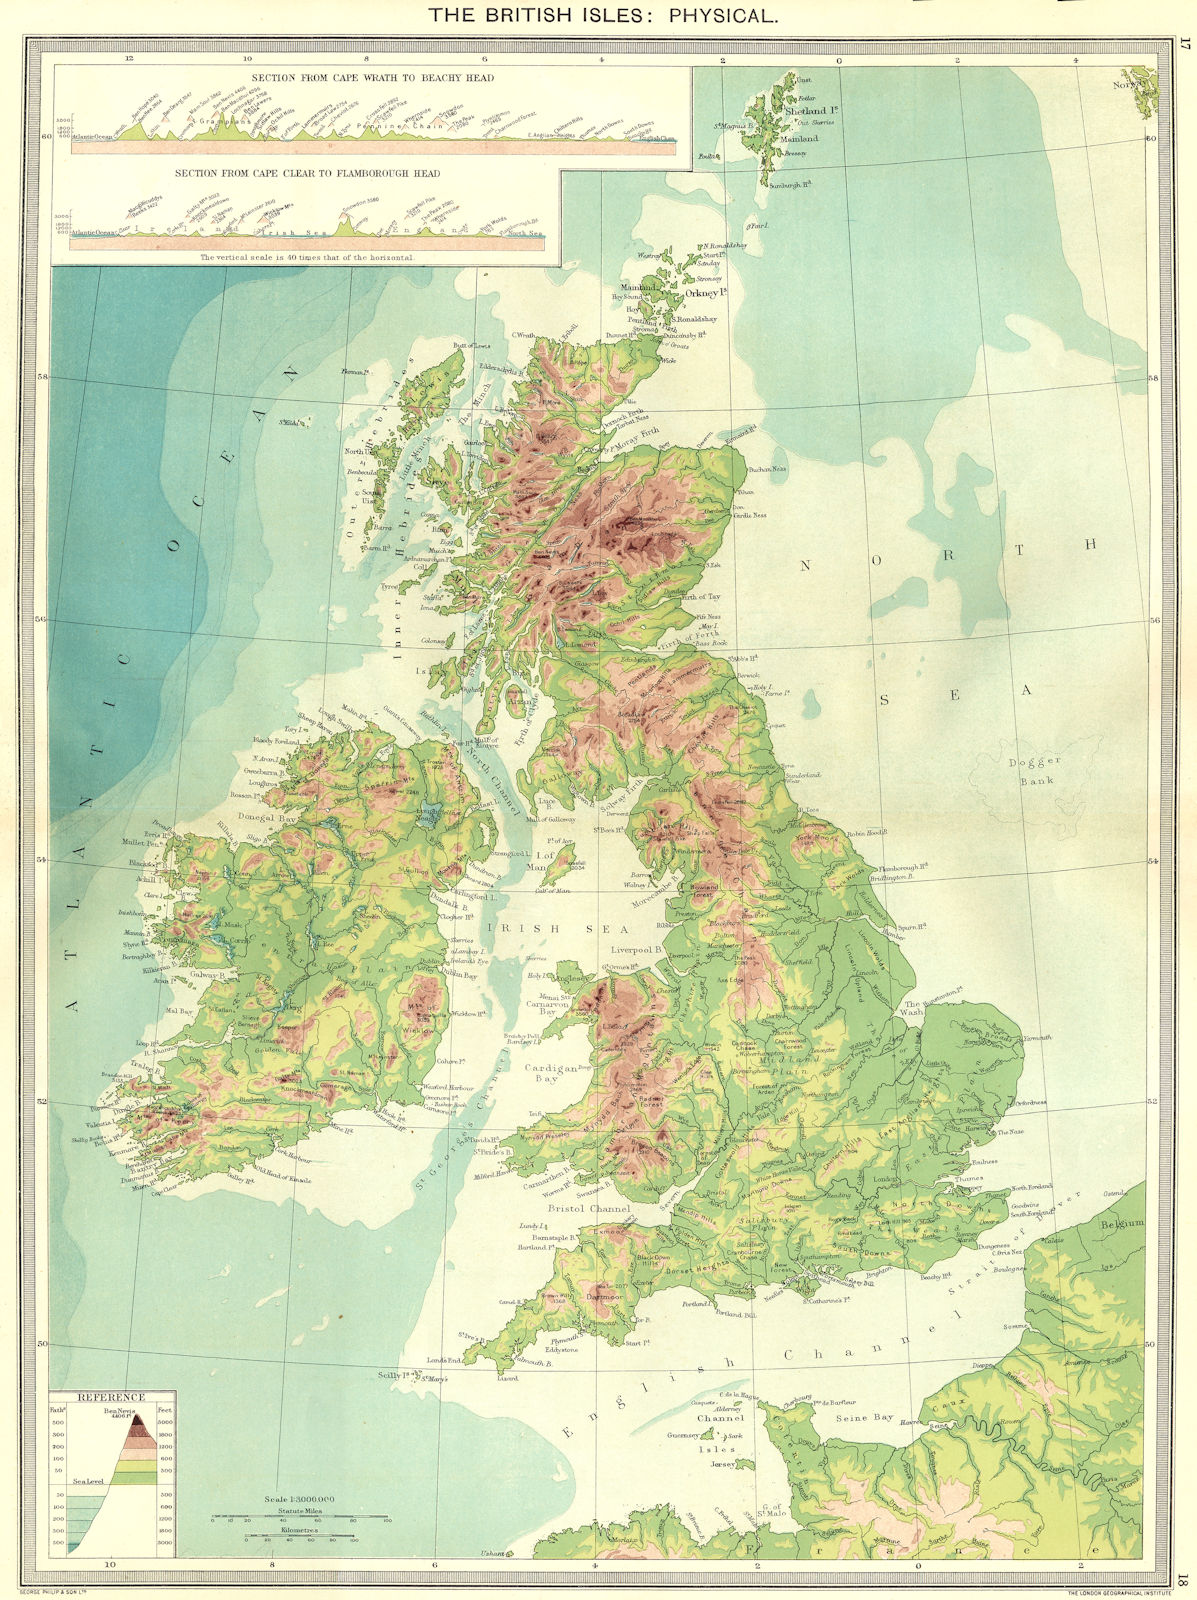 UK. The British Isles. Physical 1907 old antique vintage map plan chart